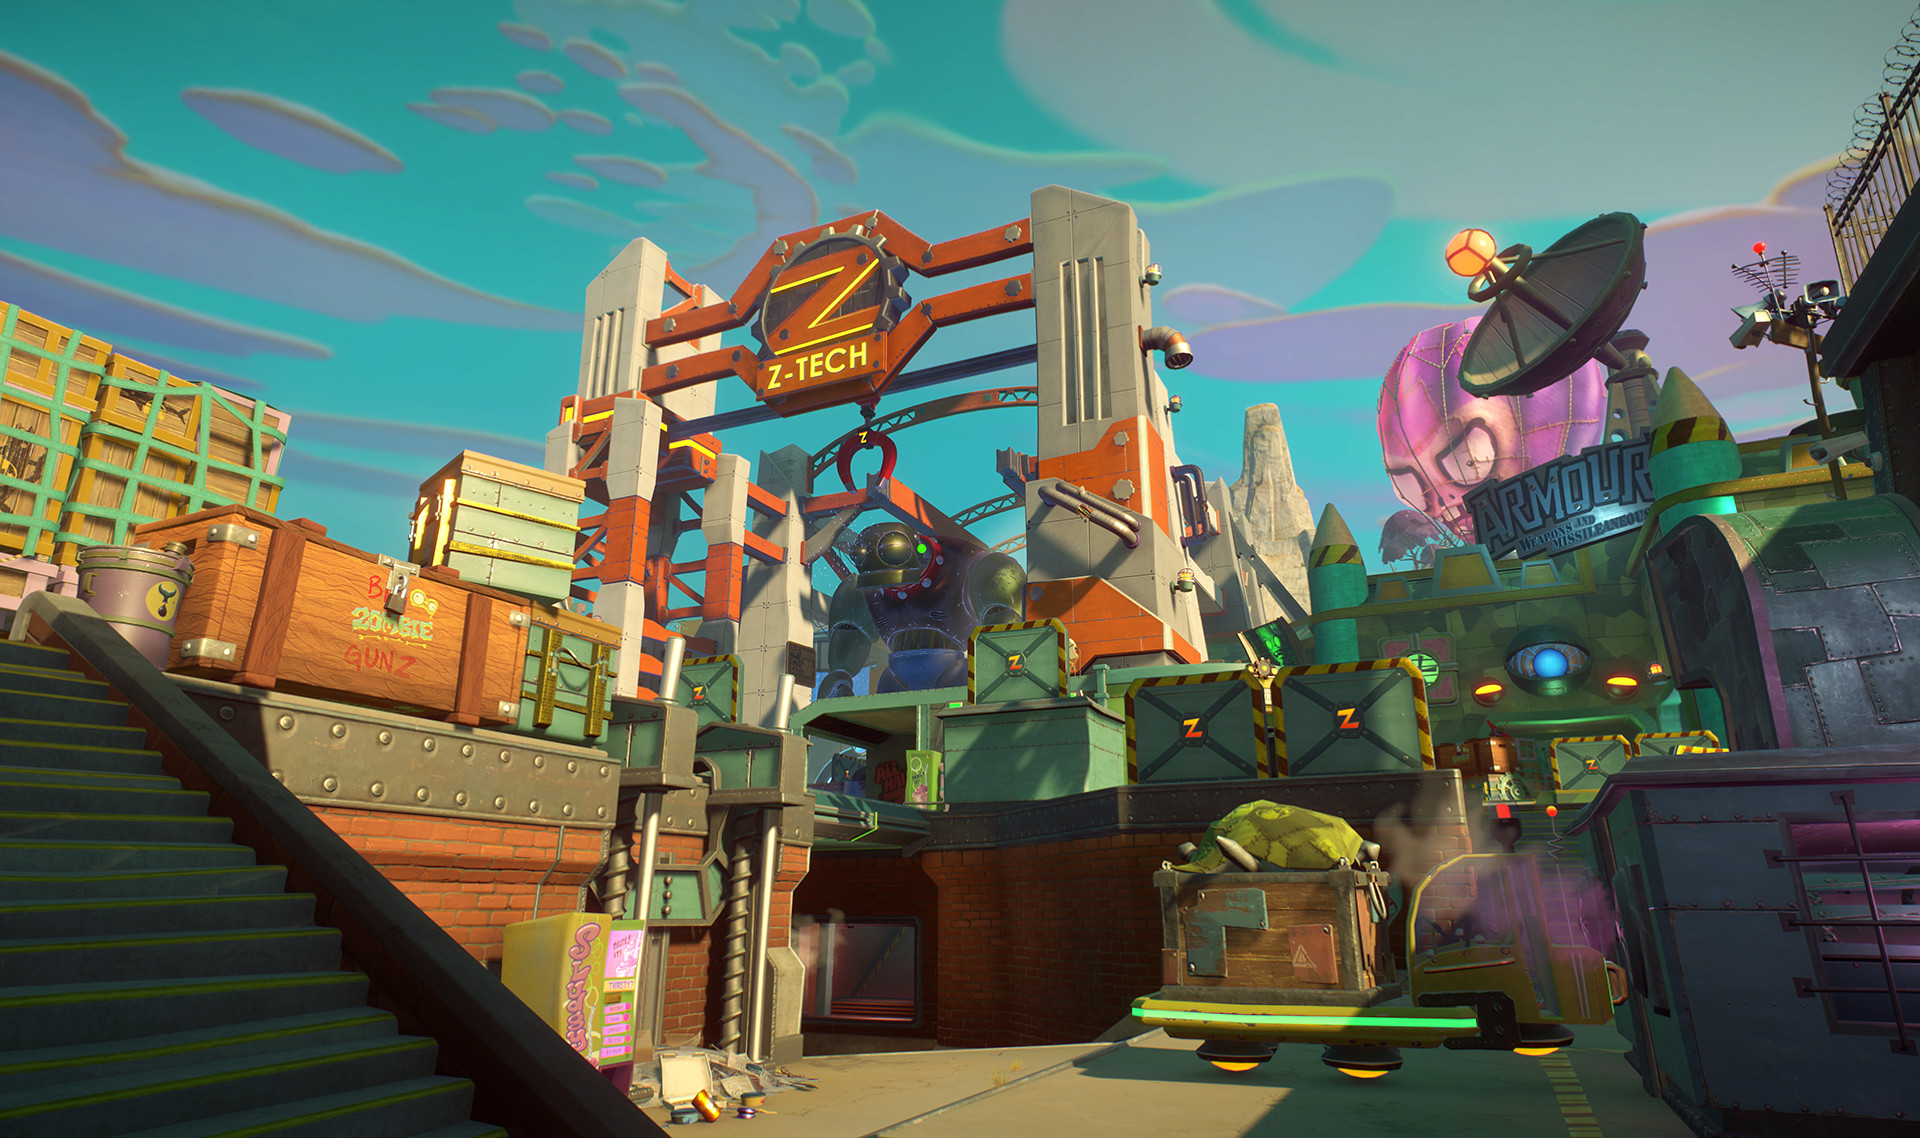 A screenshot from Plants vs Zombies: Garden Warfare 2. I created 3D environment concepts, final assets and environments